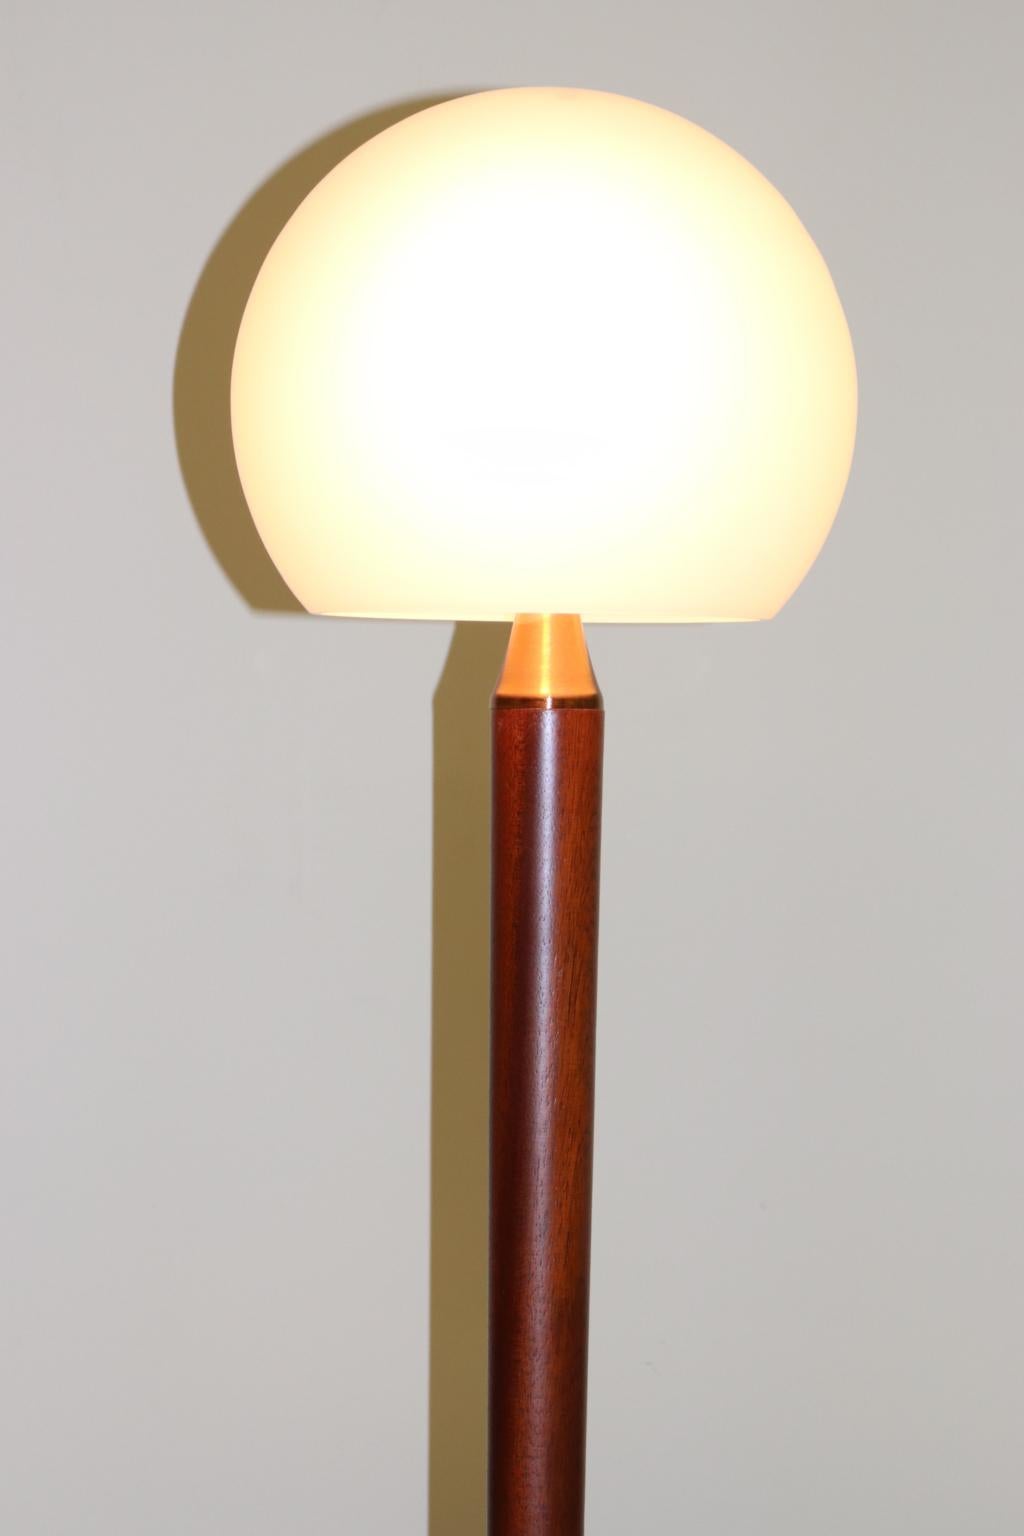 Italian floor lamp, white hand blown Murano glass diffuser, solid mahogany stem and brushed copper base and details, clear lacquered to prevent copper oxidation. The 